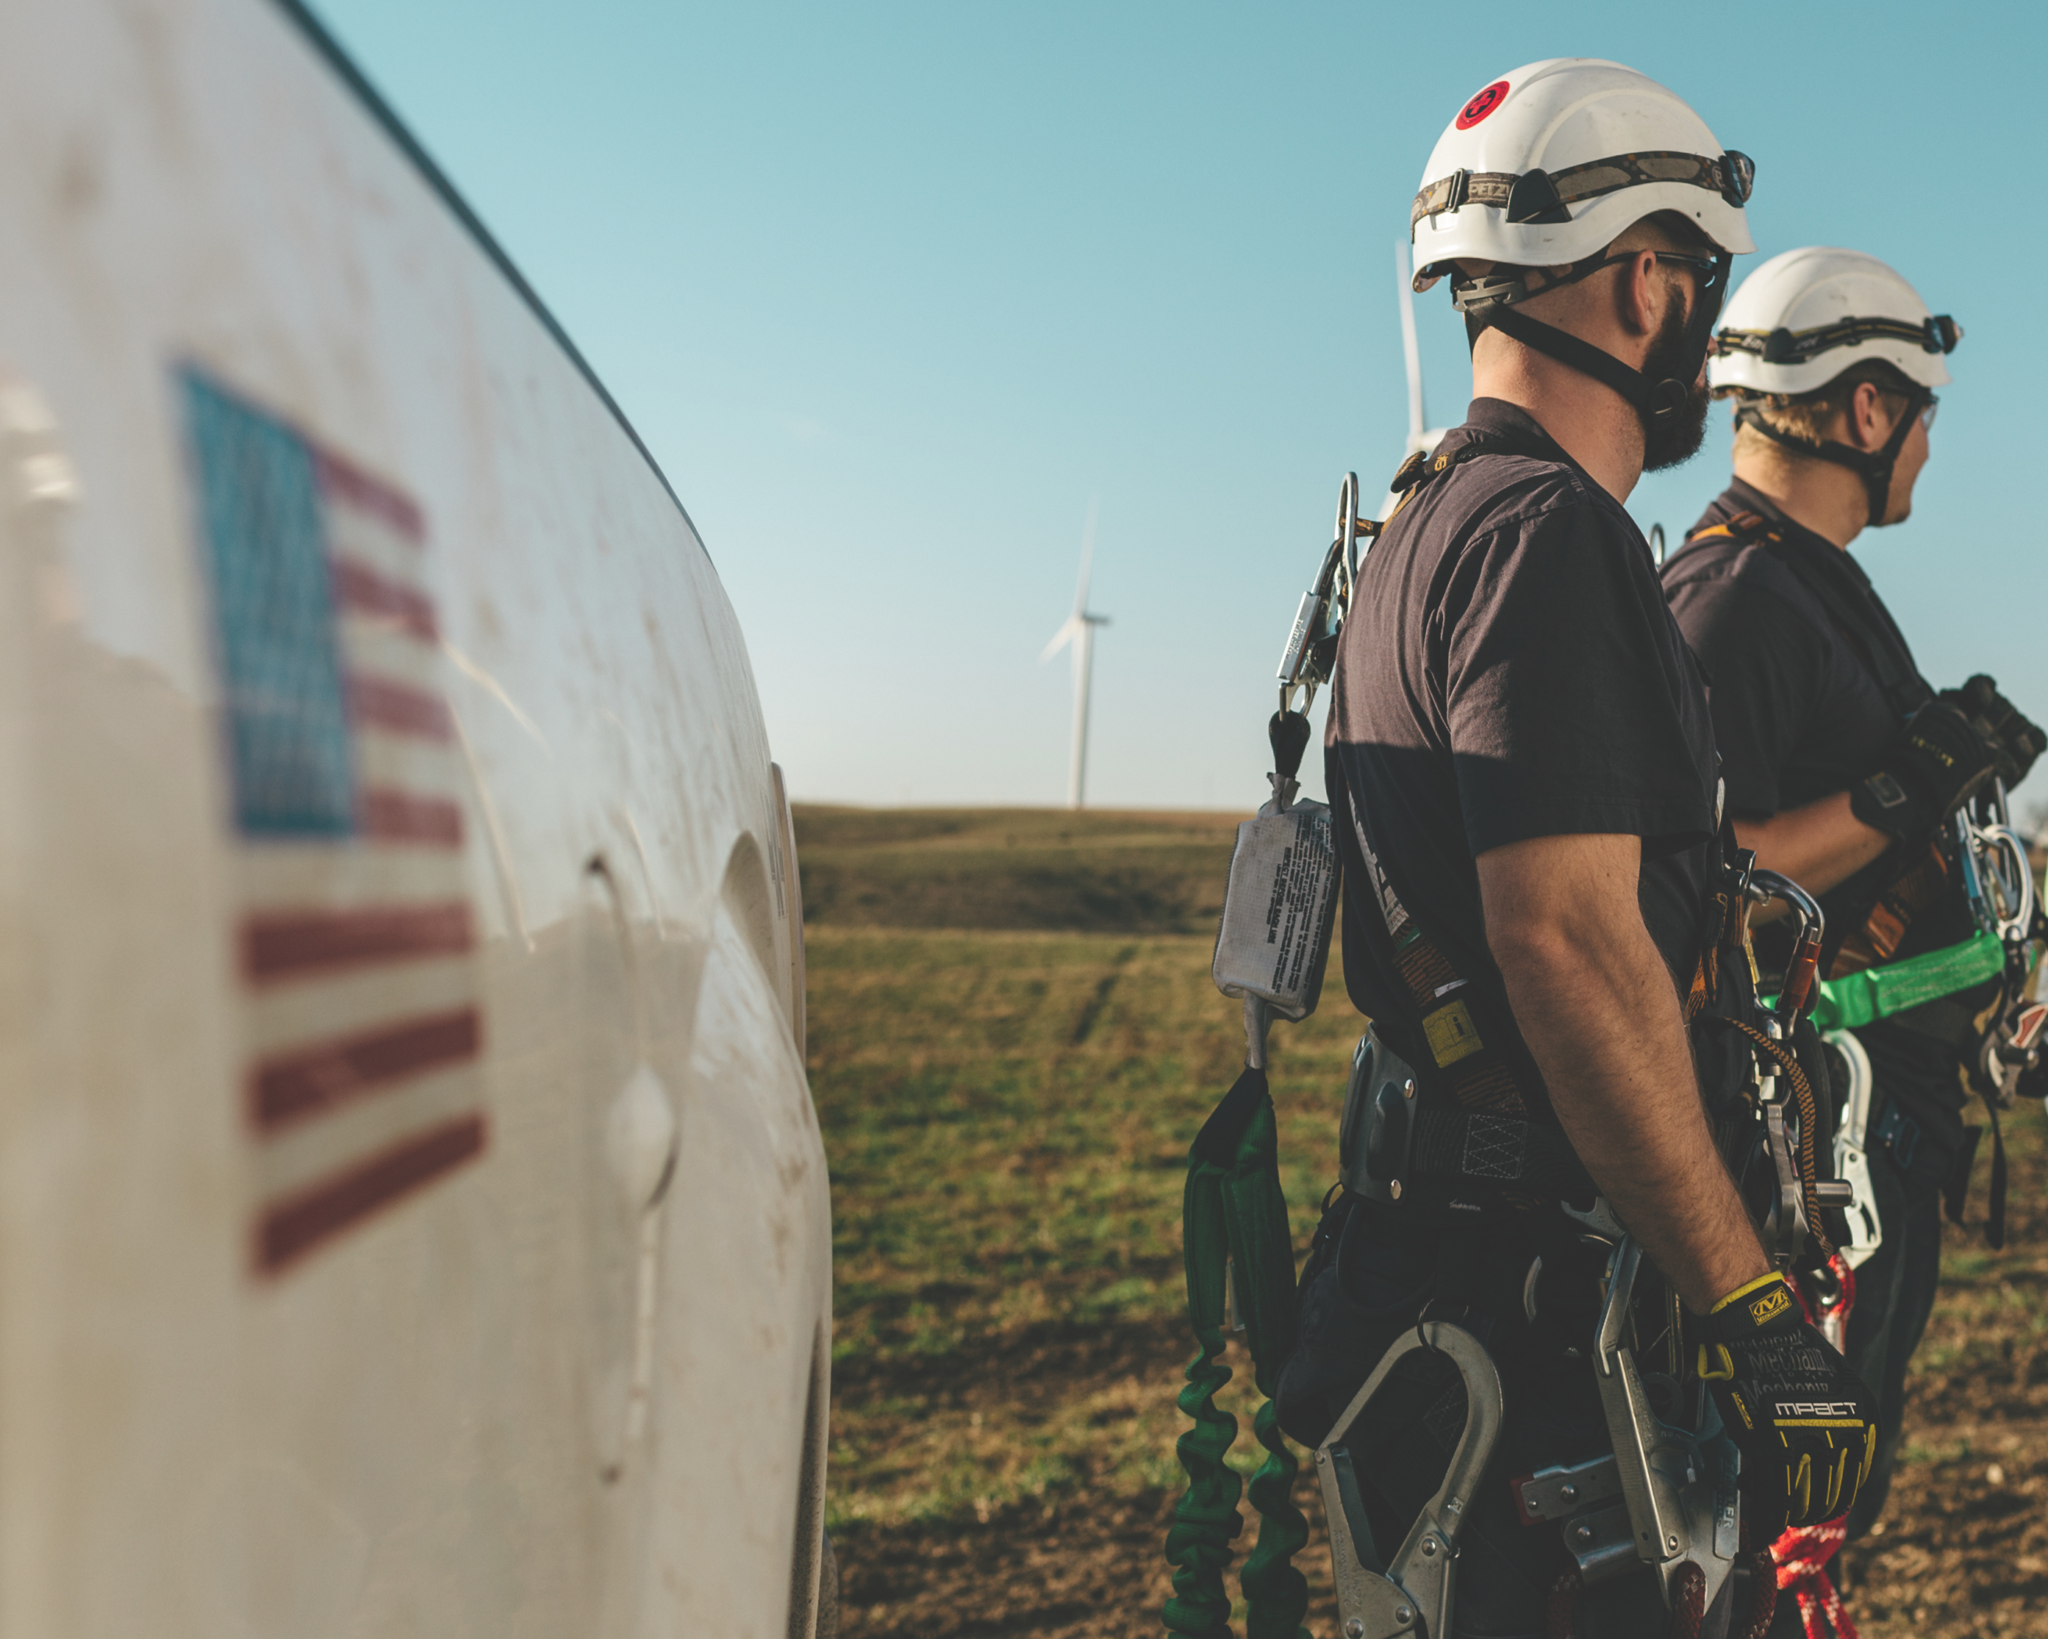 Two Wind Turbine Technicians Outfitted with Service Equipment.